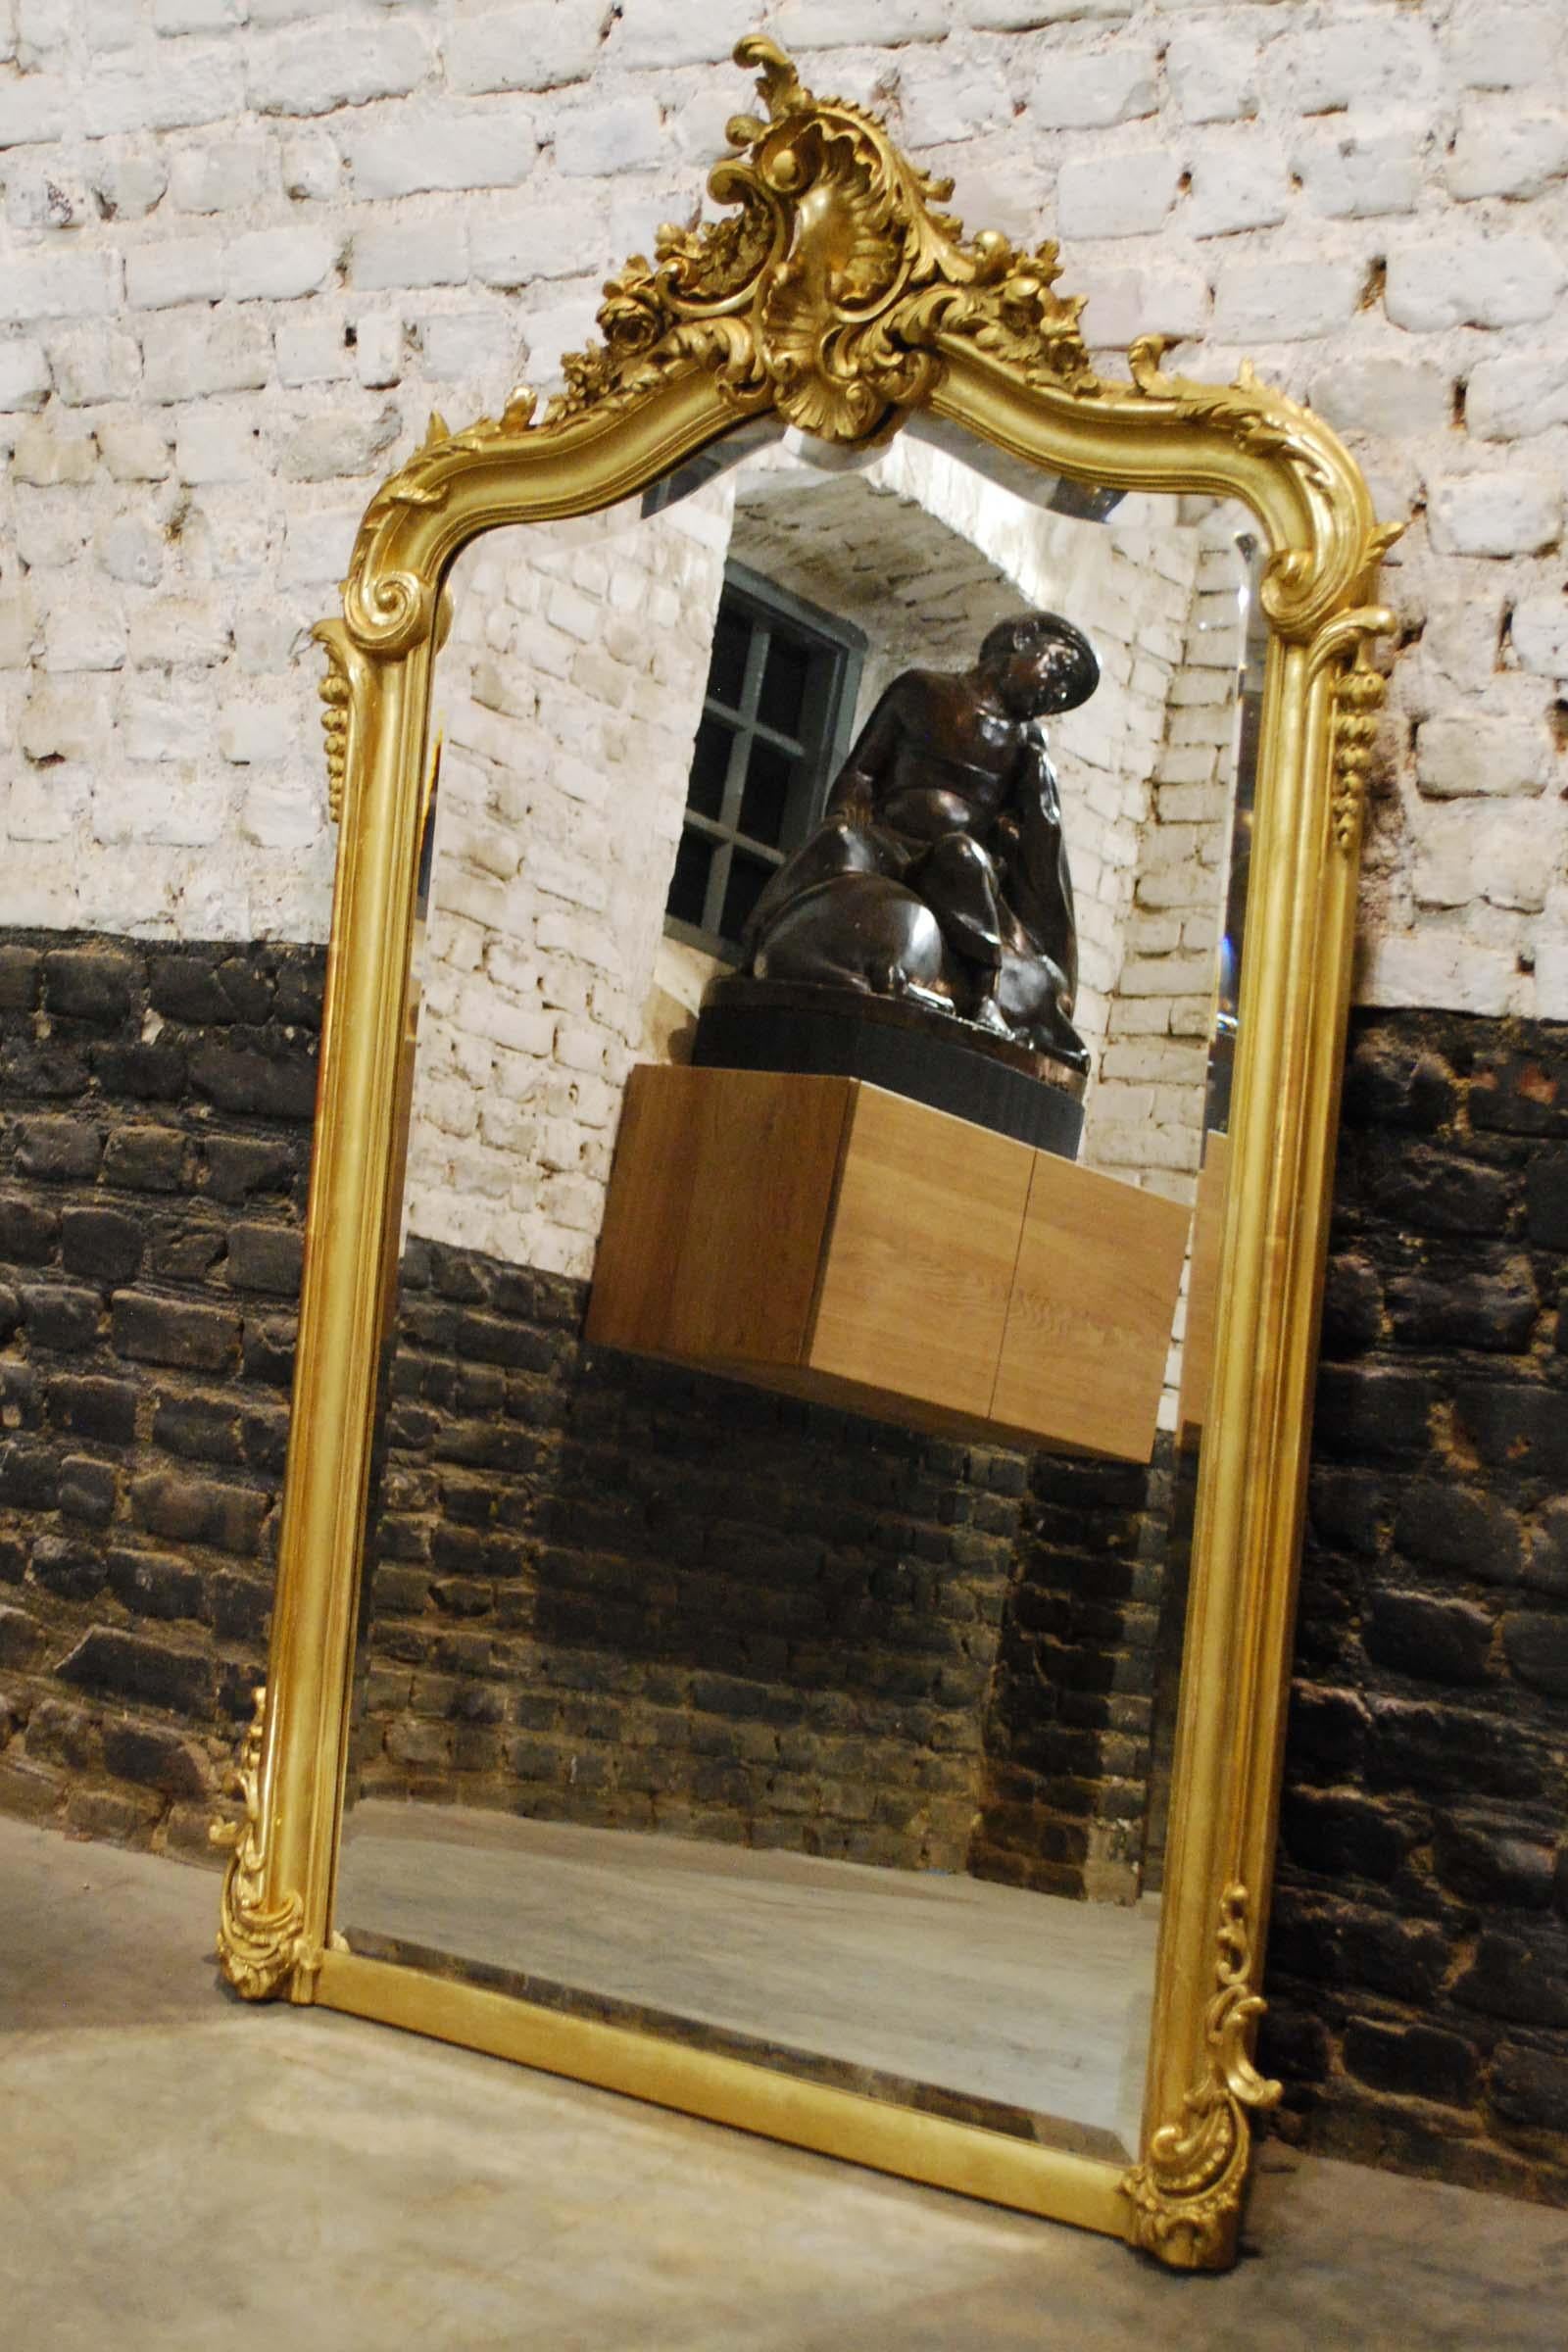 A beautiful antique French mirror in Louis Quinze style. 
It has the asymmetrical ornamentation typical for Louis Quinze and Rococo. The double-arched top features an intricate crown with motifs such as rocailles, shells, flowers, and acanthus